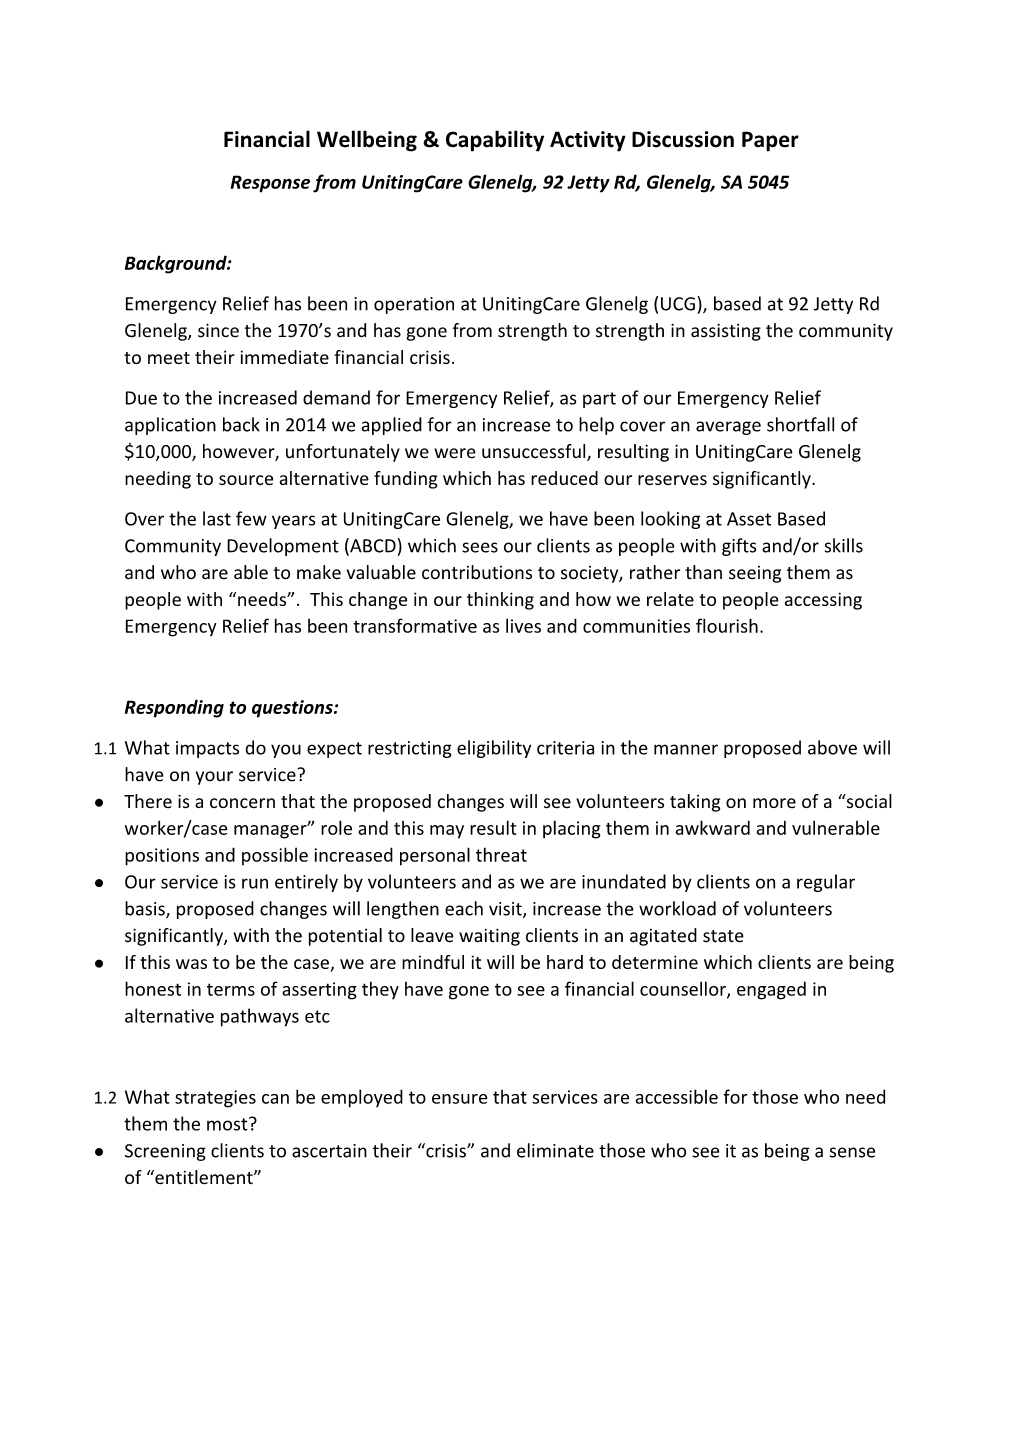 Financial Wellbeing & Capability Activity Discussion Paper